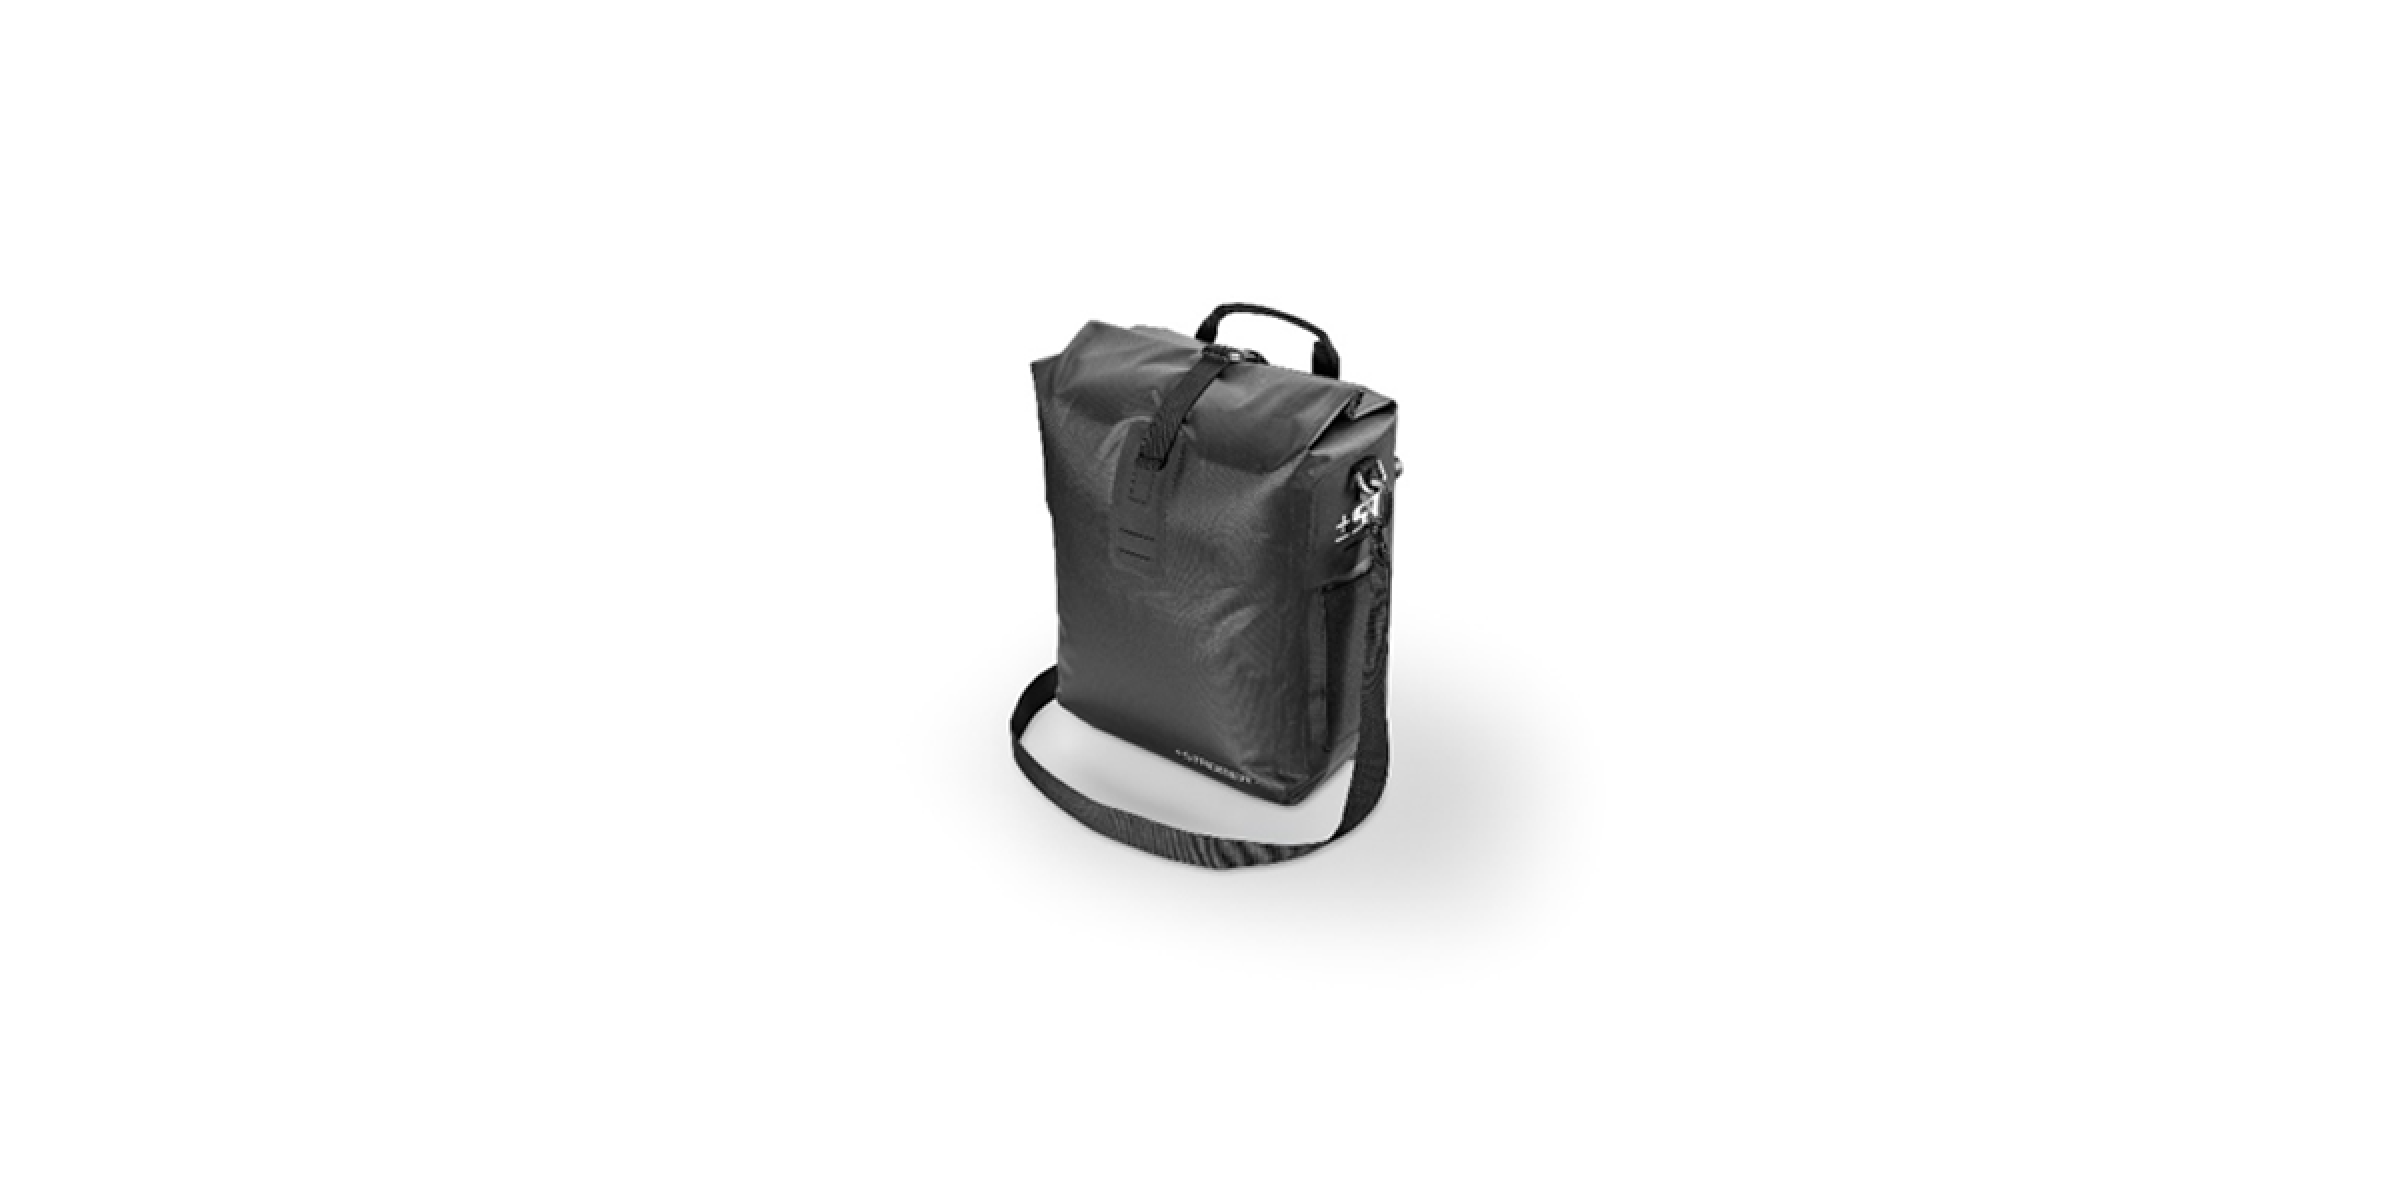 <a href="https://cycles-clement.be/product/stromer-bag-antwerp-20l-waterproof/">STROMER BAG ANTWERP 20L (WATERPROOF)</a>